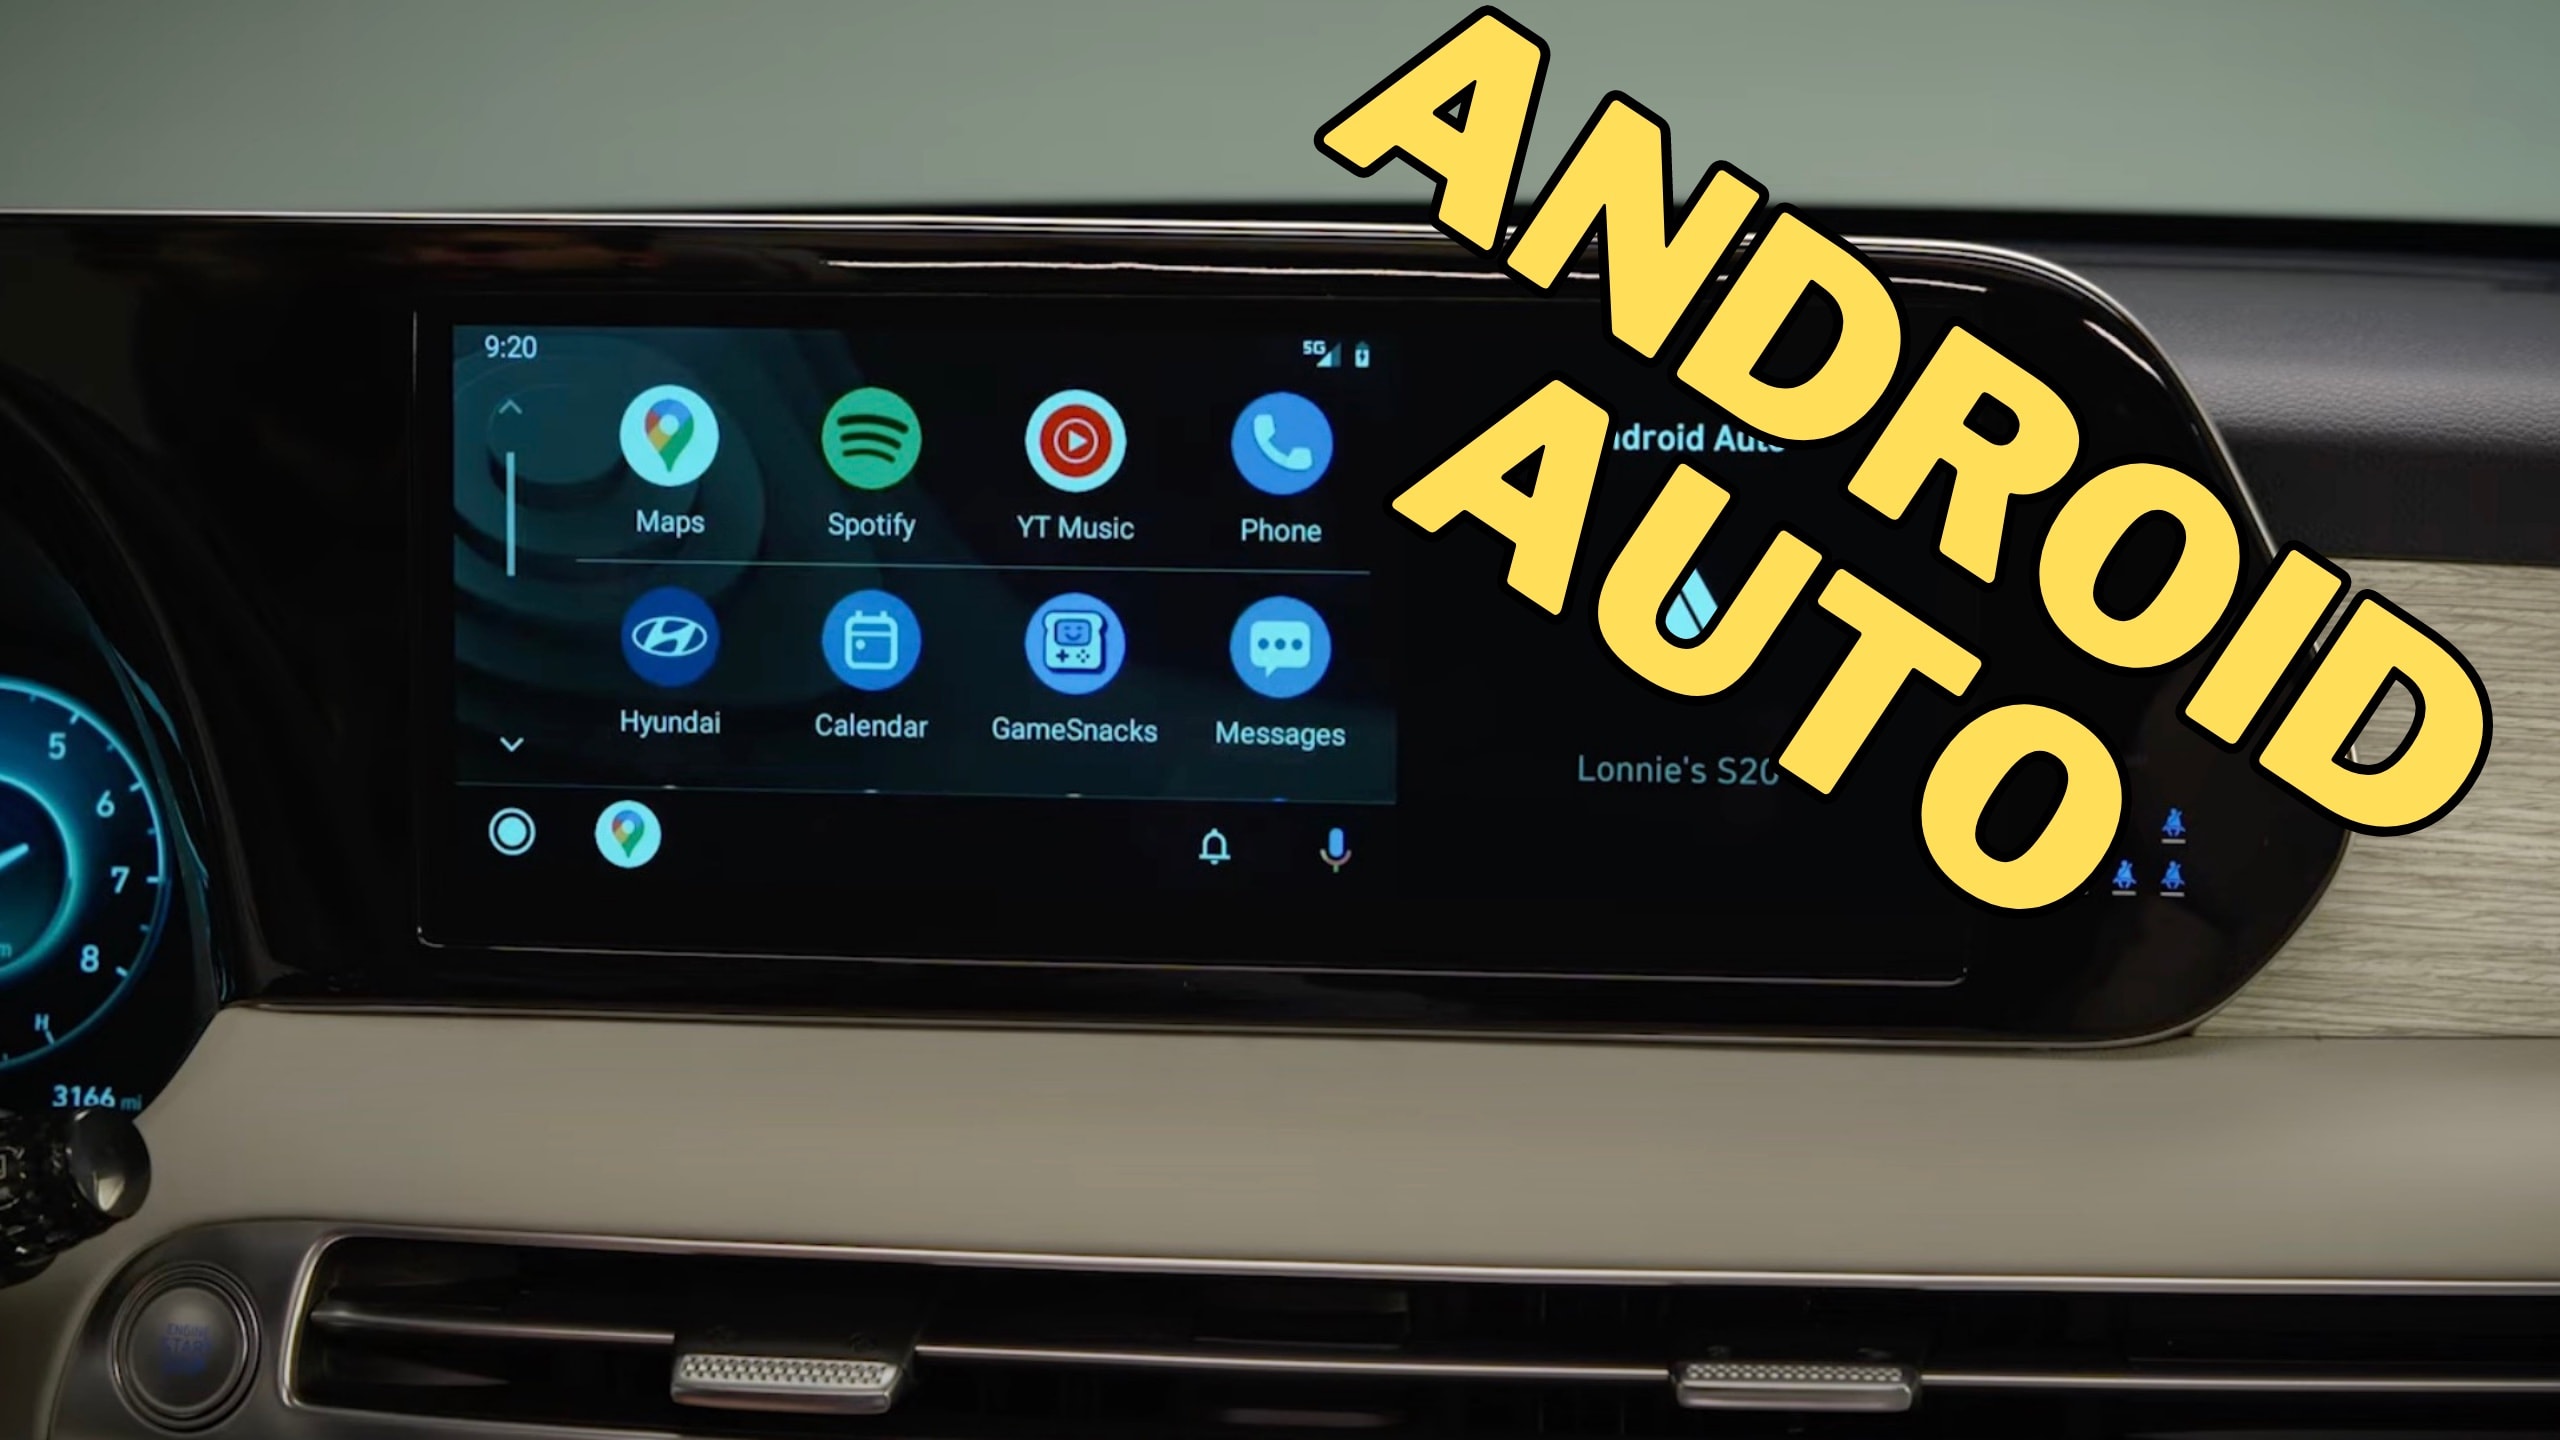 https://s1.cdn.autoevolution.com/images/news/how-to-set-up-android-auto-in-a-hyundai-car-213772_1.jpg